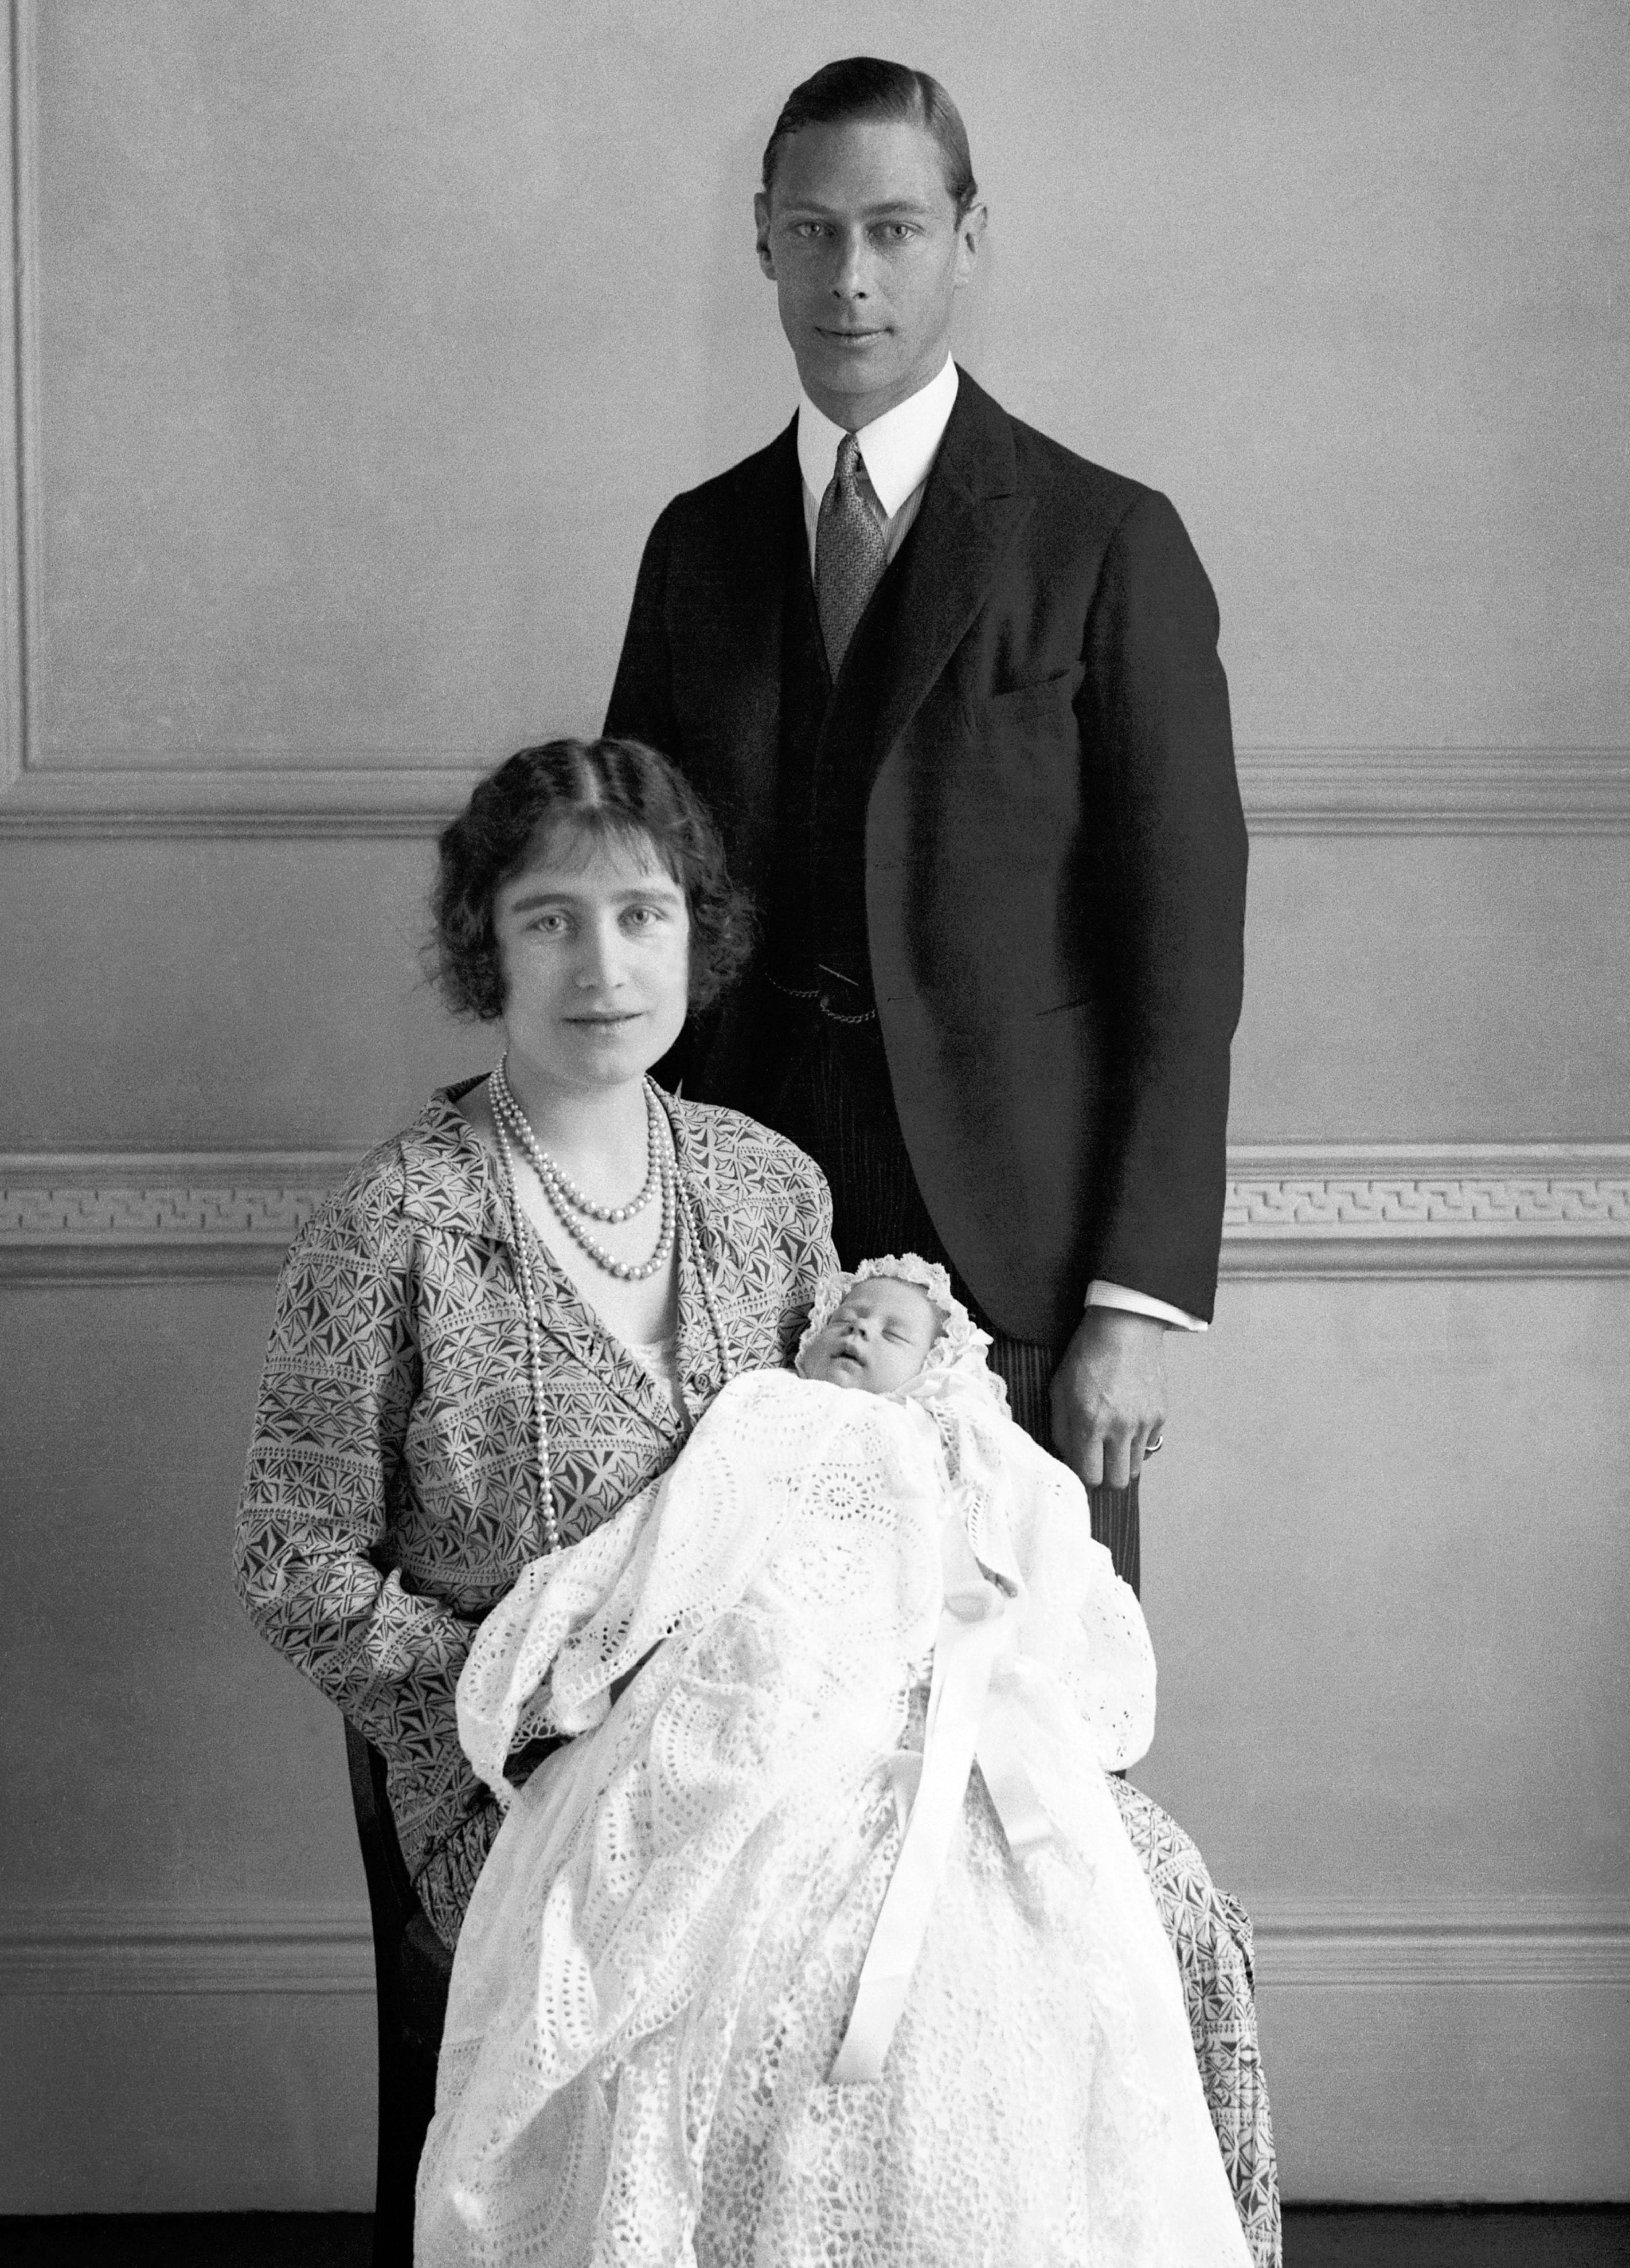 King George VI and Queen Elizabeth, as they would later become, with baby Elizabeth, the reigning Queen (PA)